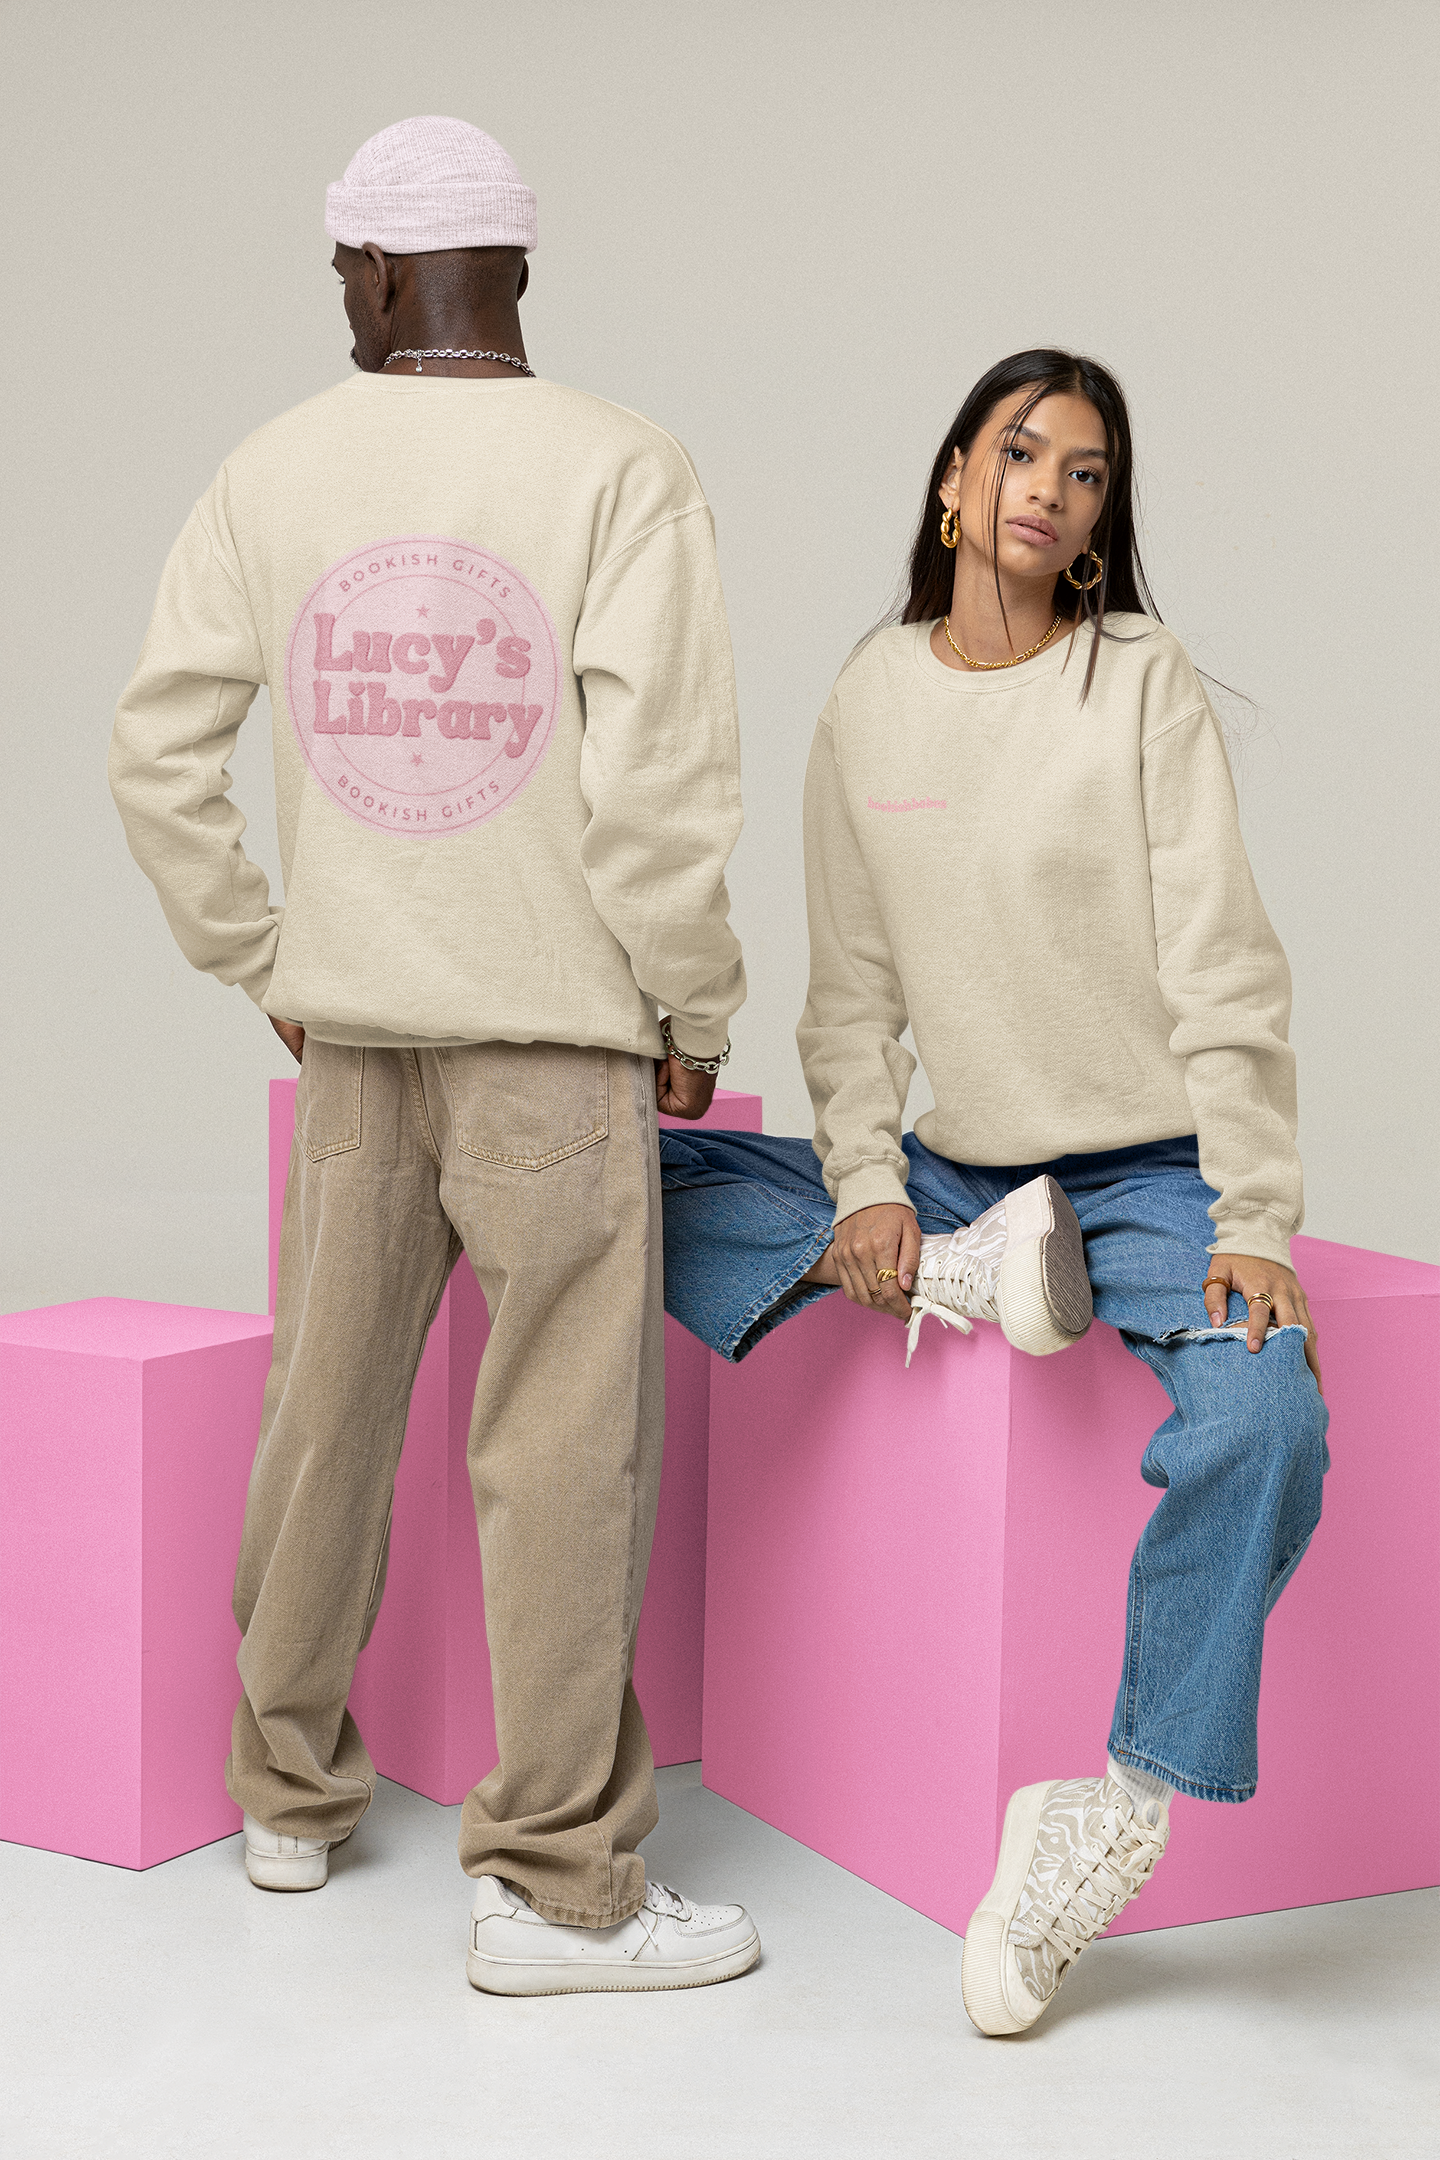 Lucy’s Library Logo Crewneck